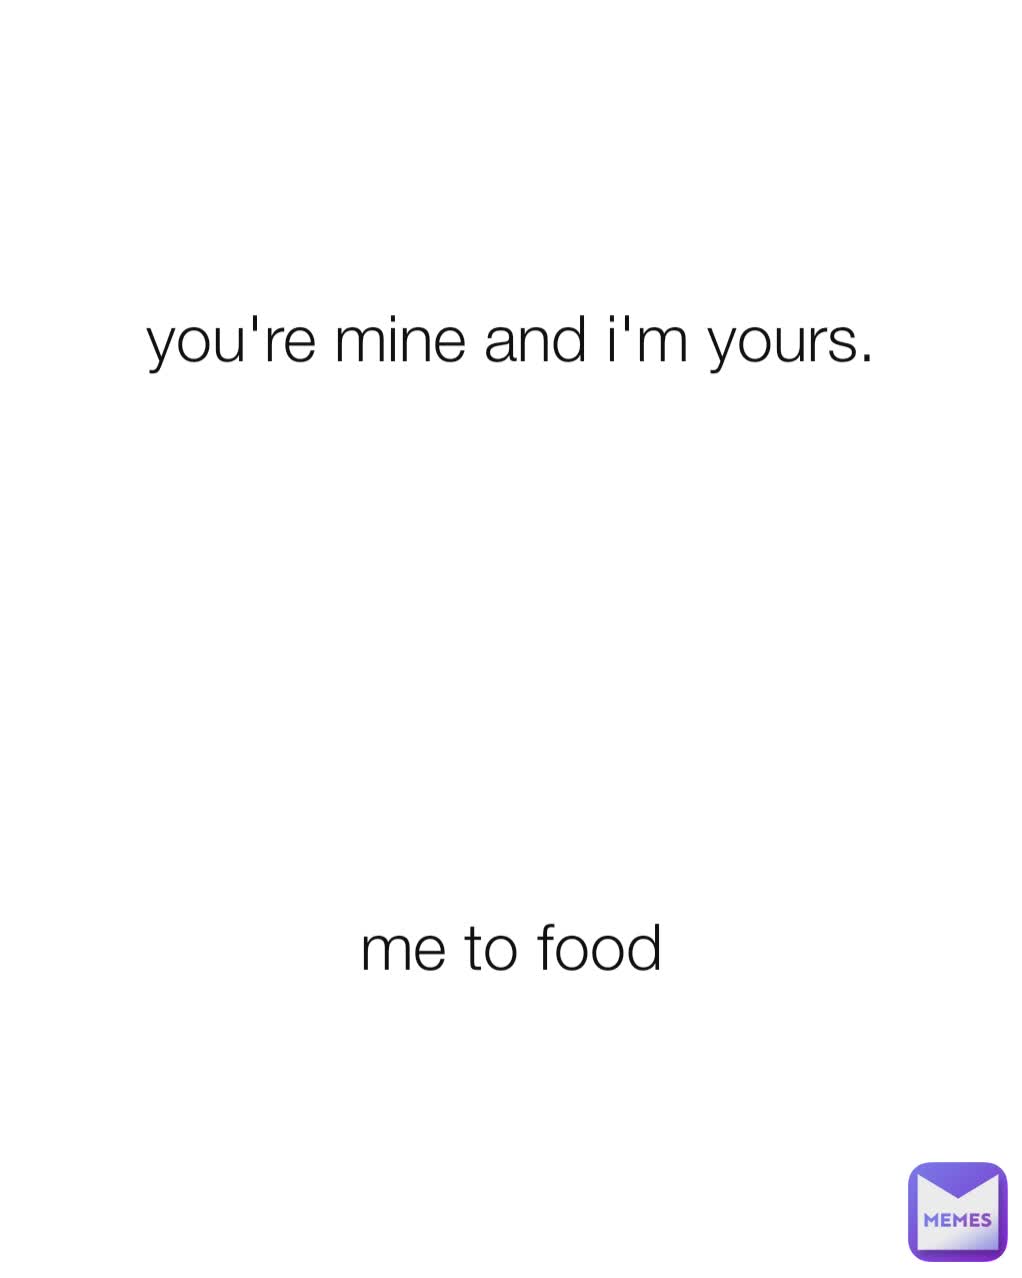 you're mine and i'm yours.







me to food